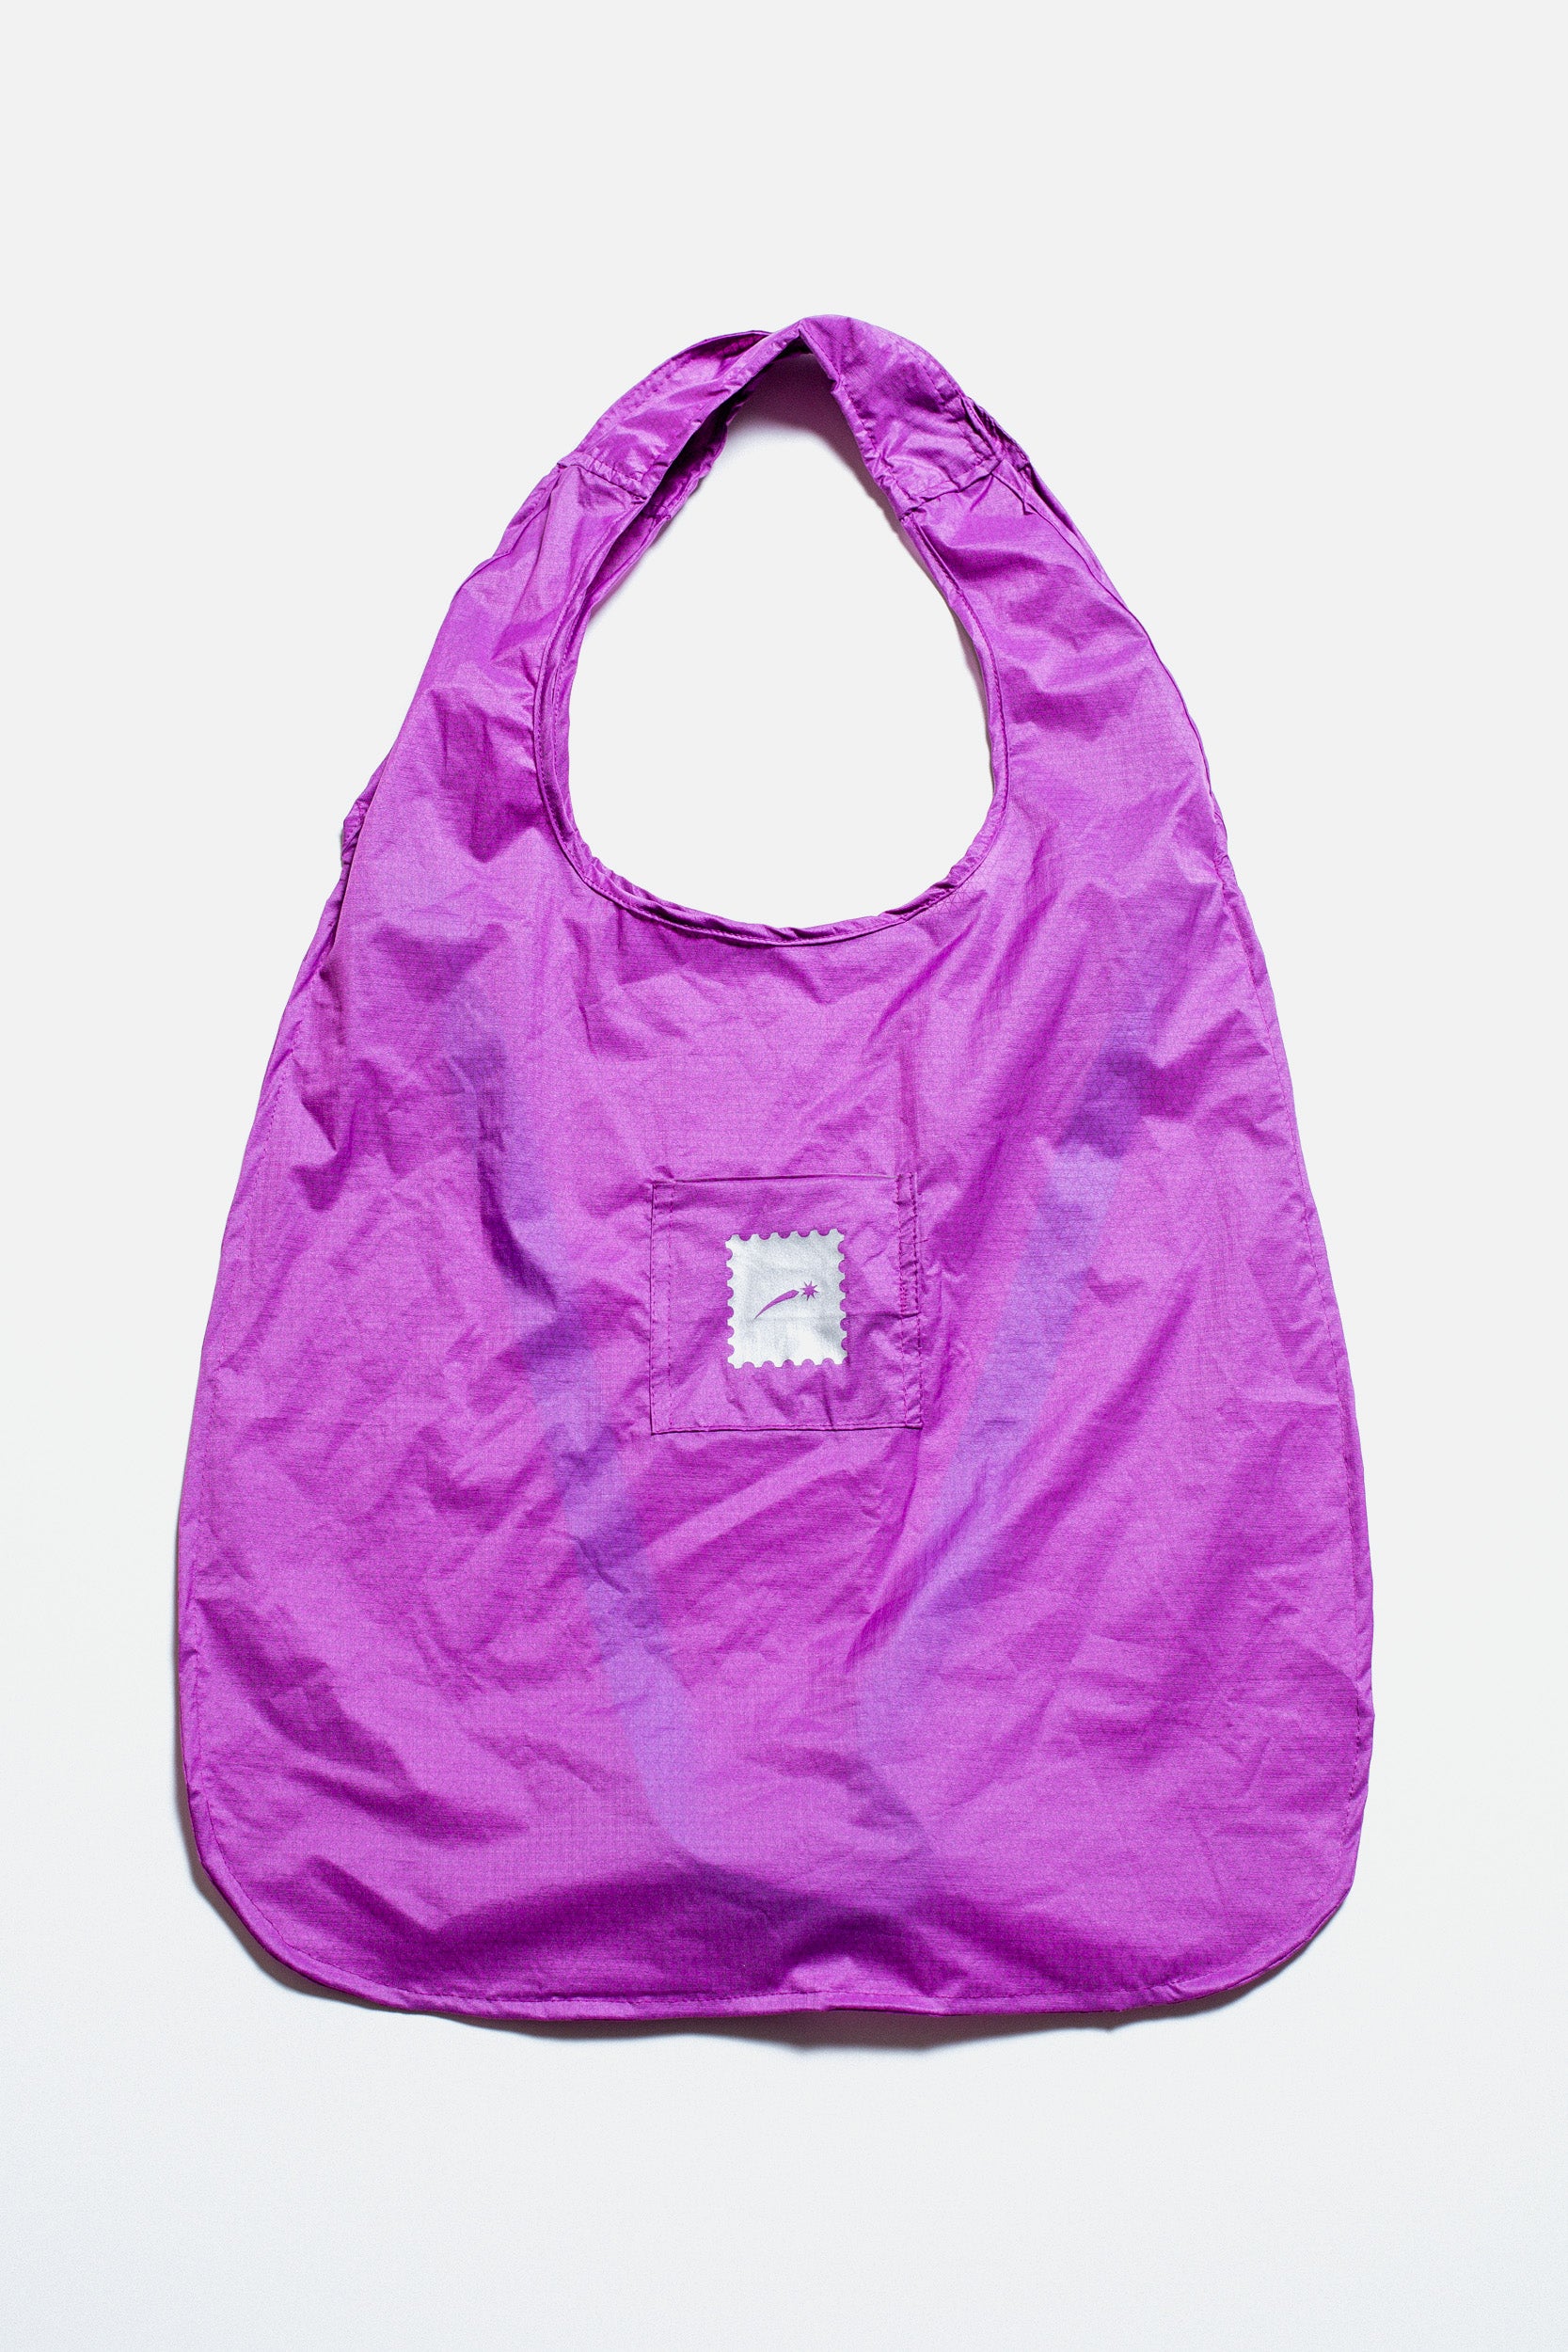 Pixie Packable Tote bag (in Fuchsia pink)